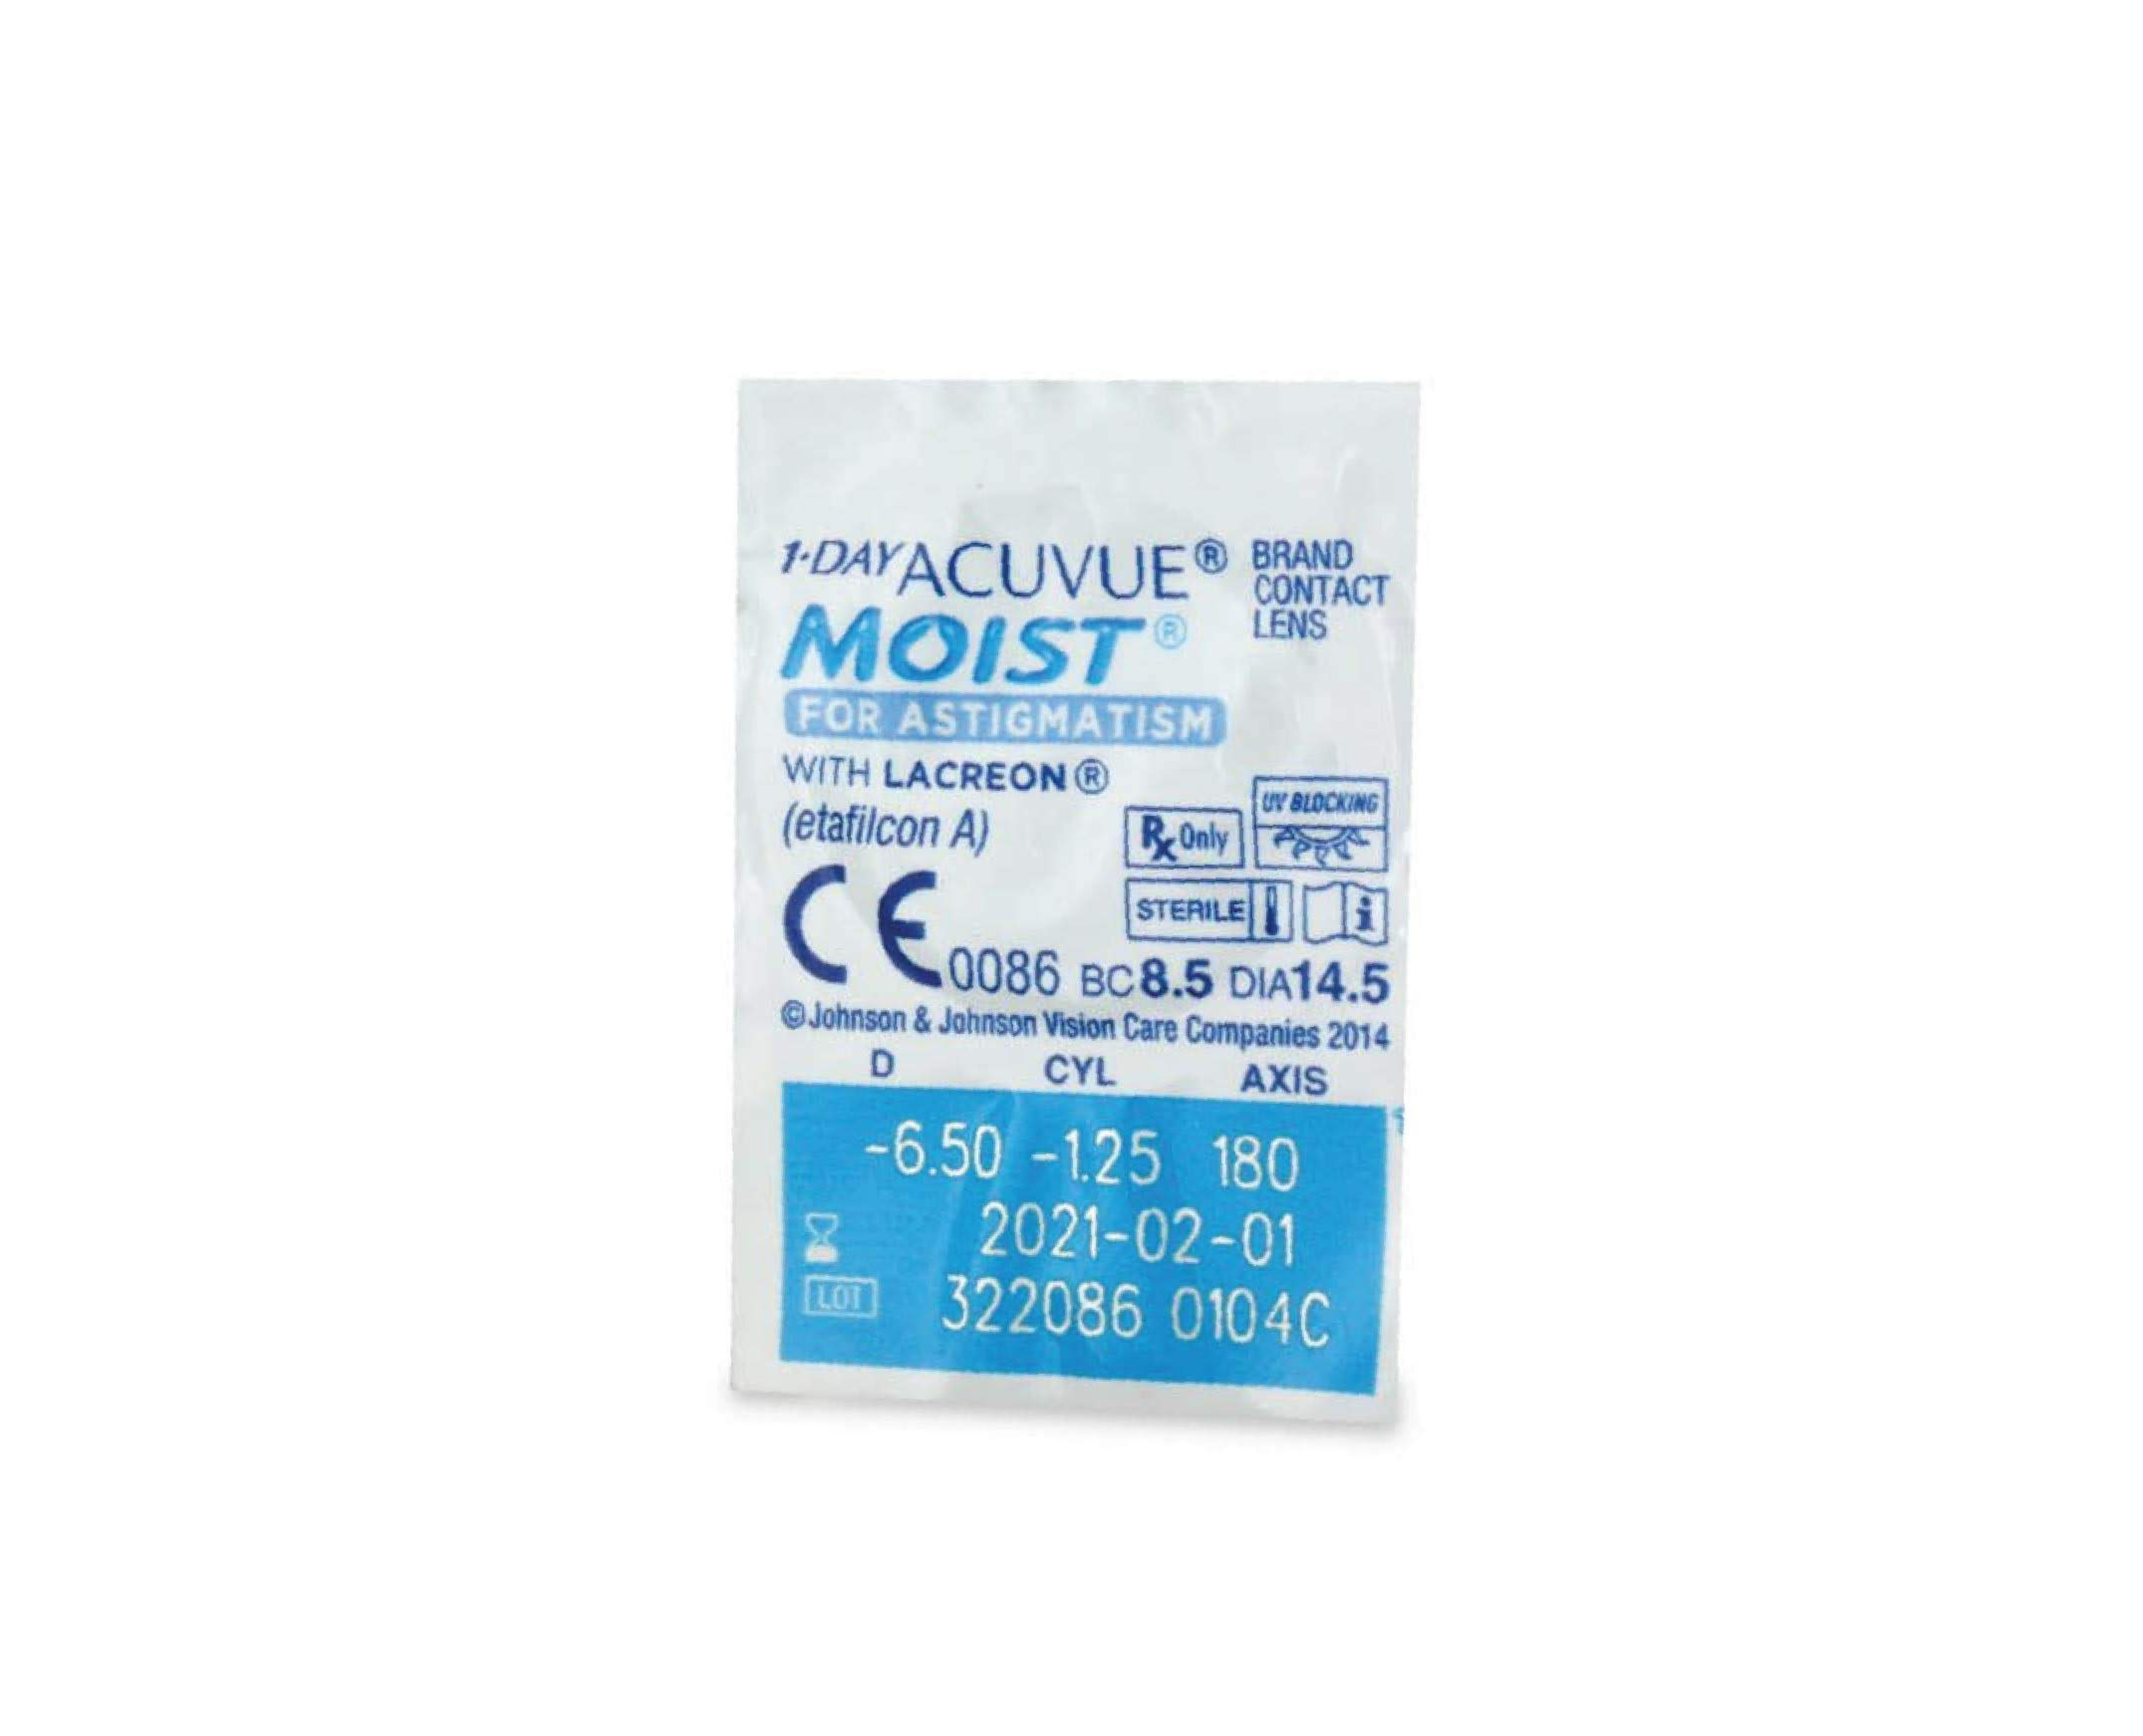 Acuvue 1-Day Moist contact lenses